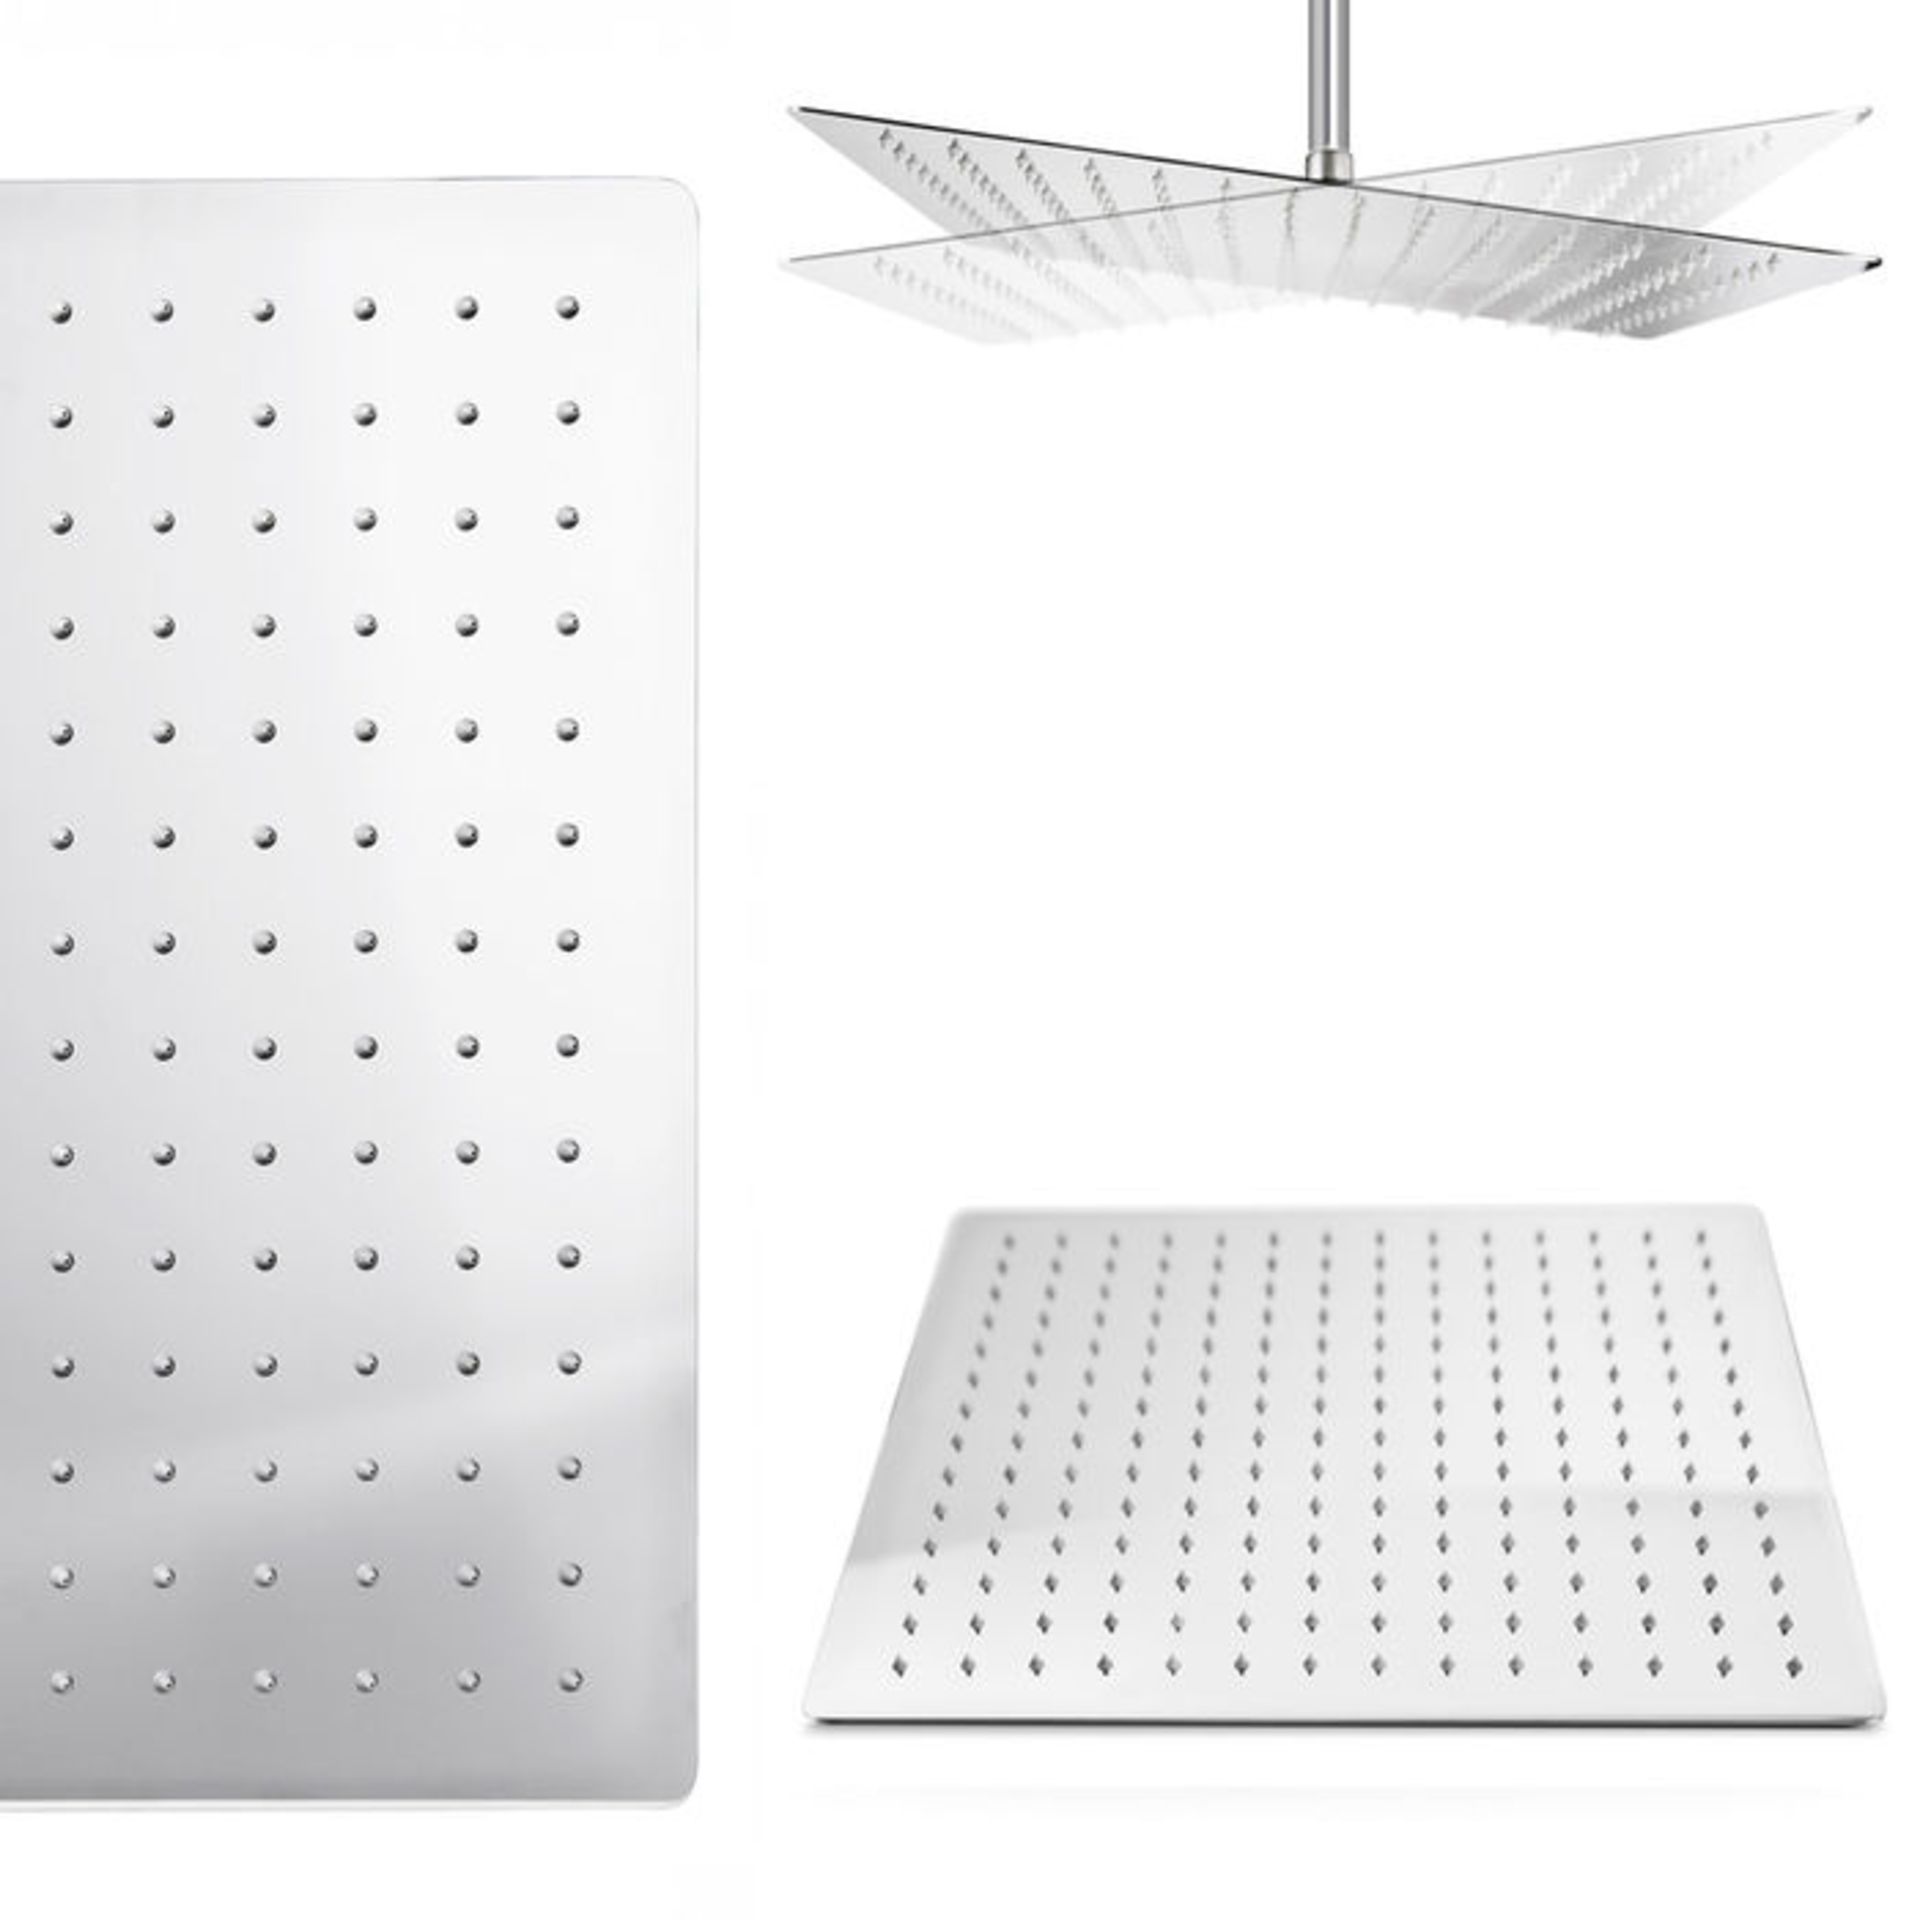 (S167) Stainless Steel 400mm Large Square Shower Head Solid metal structure Can be wall or ceiling - Image 2 of 3